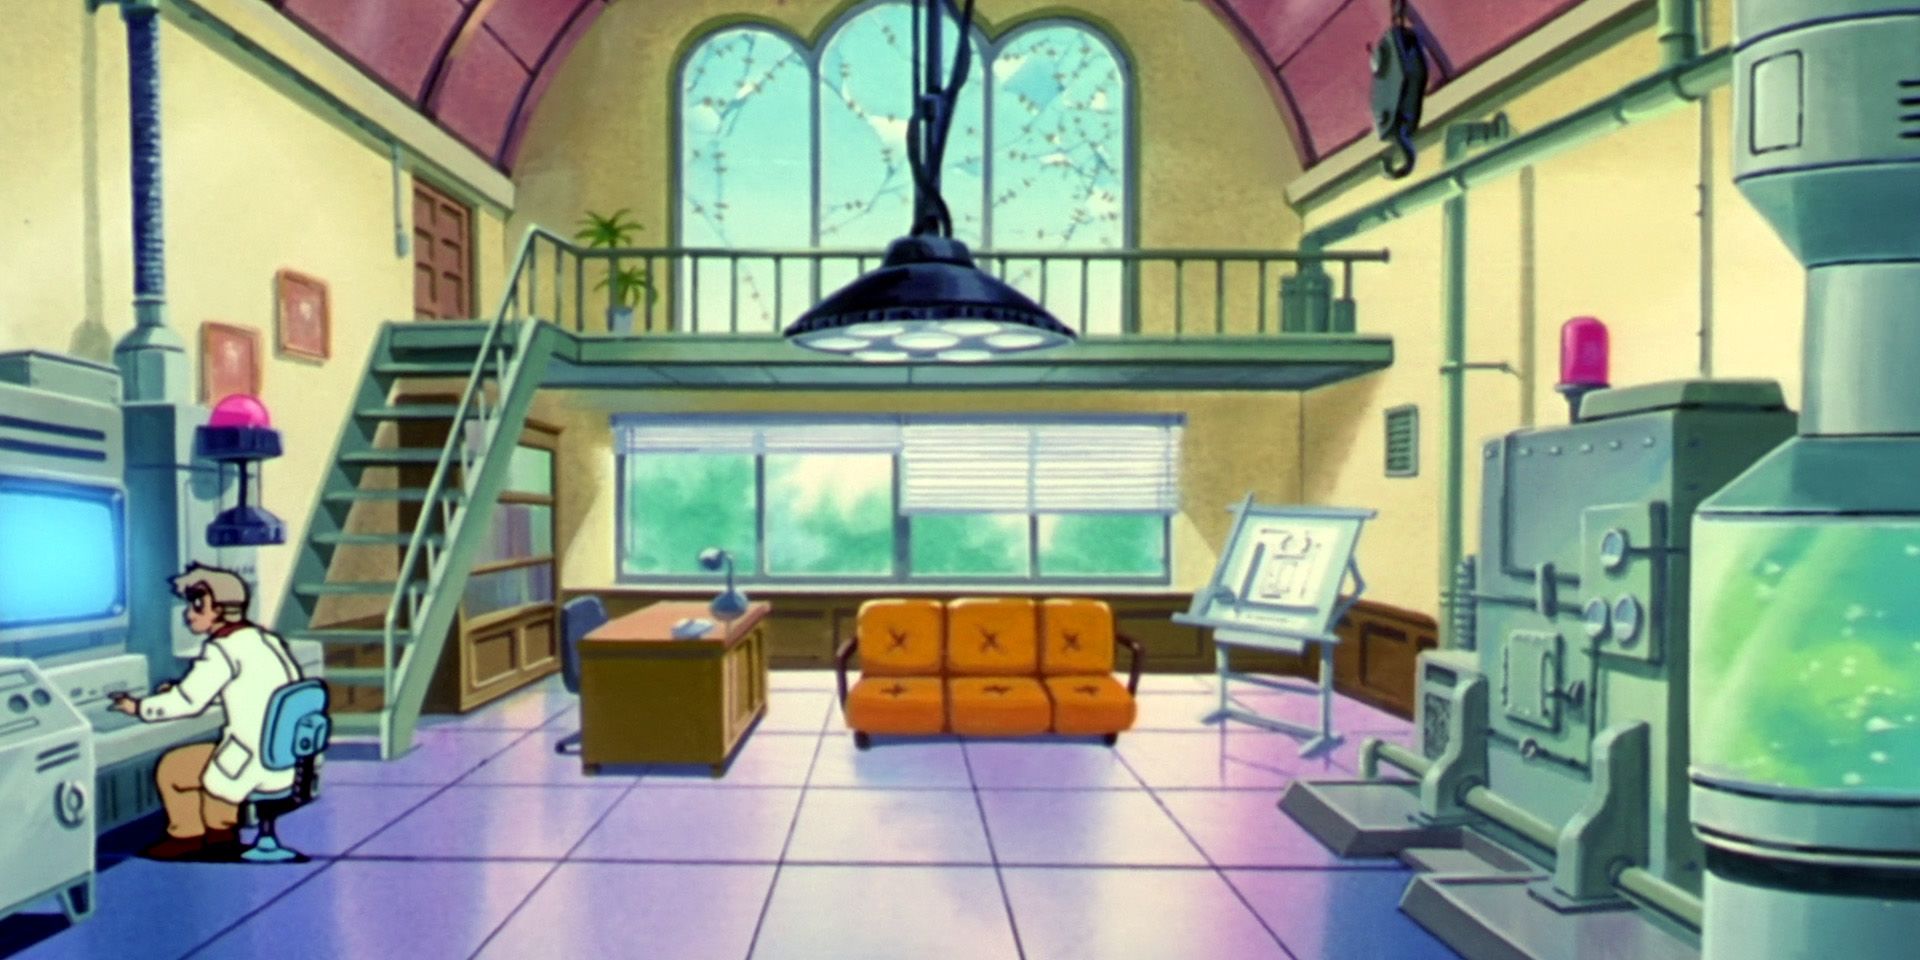 Professor Oak's lab seems like a dull place for Pokemon to live